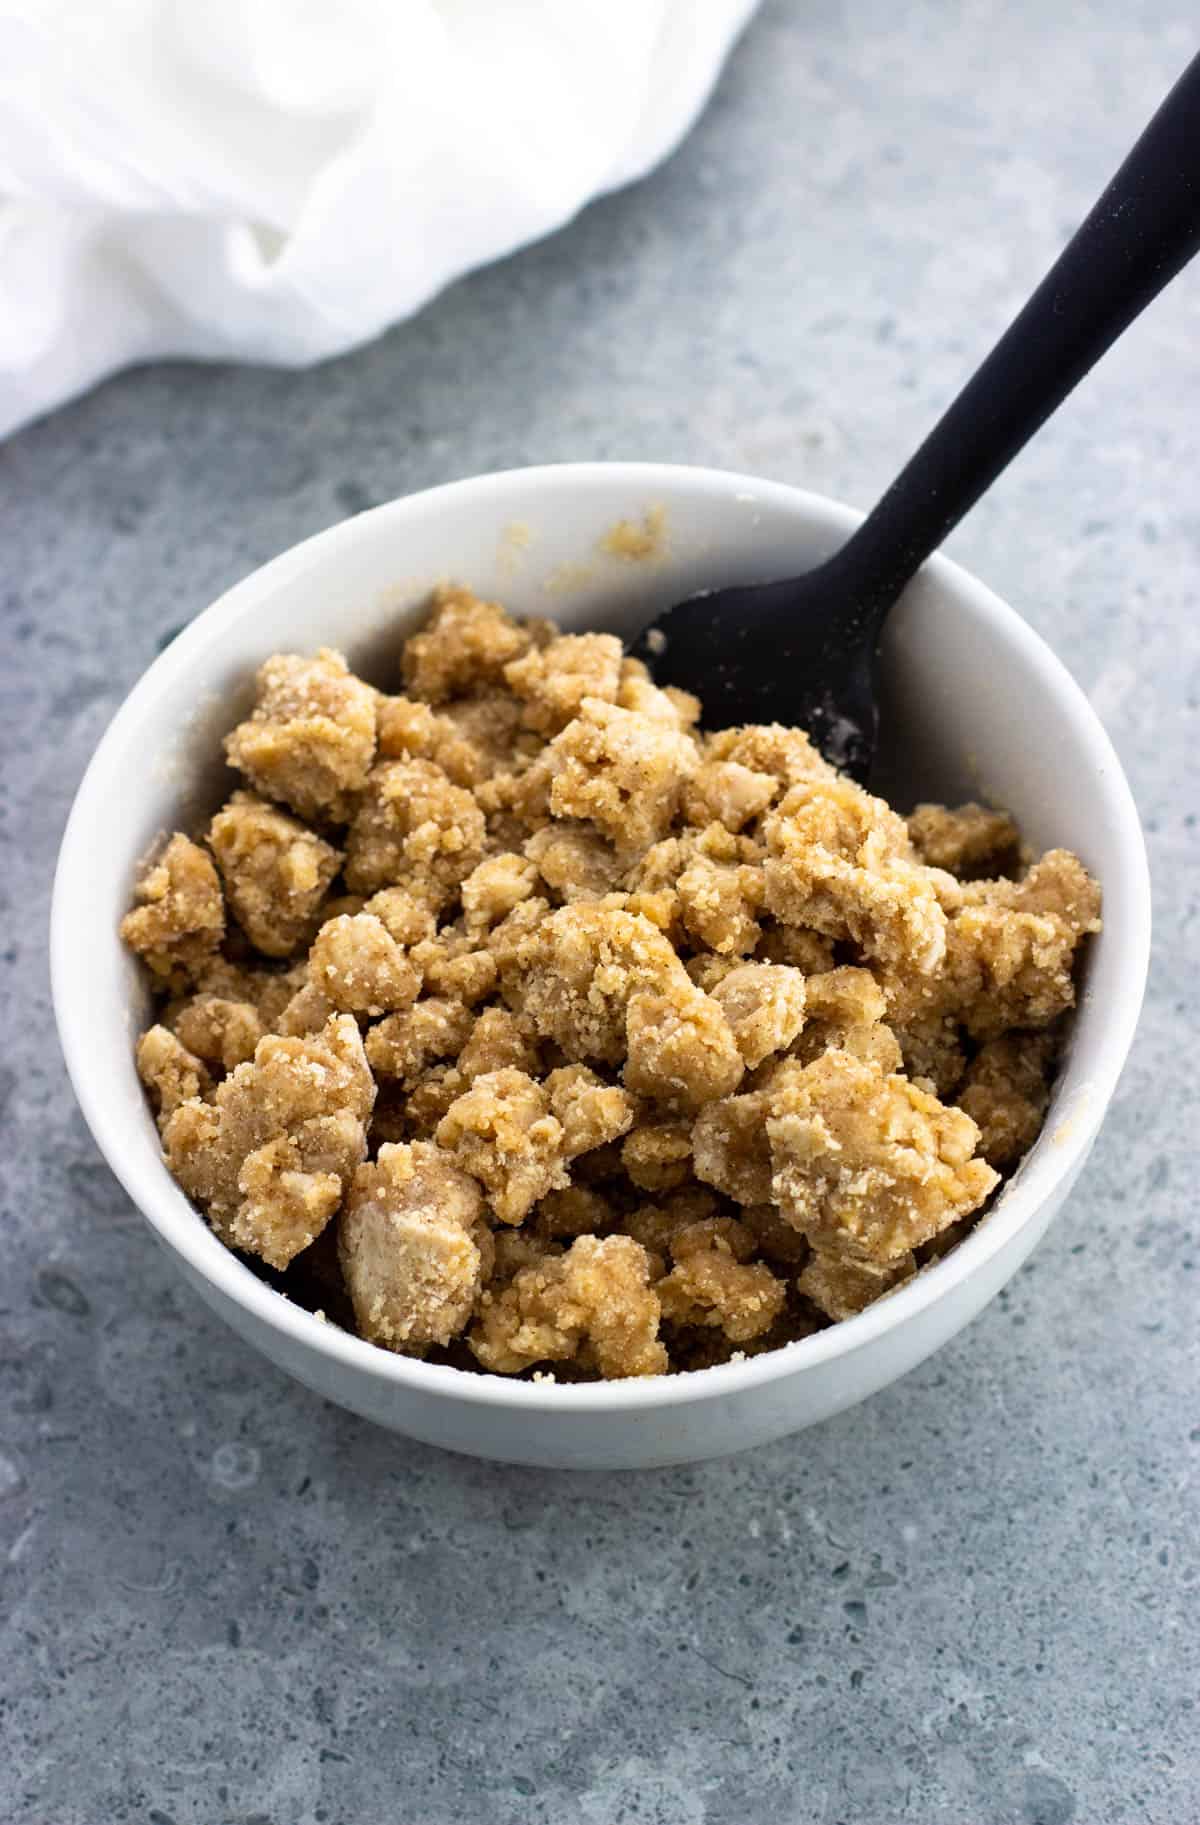 A bowl full of the mixed crumble topping with a spatula.